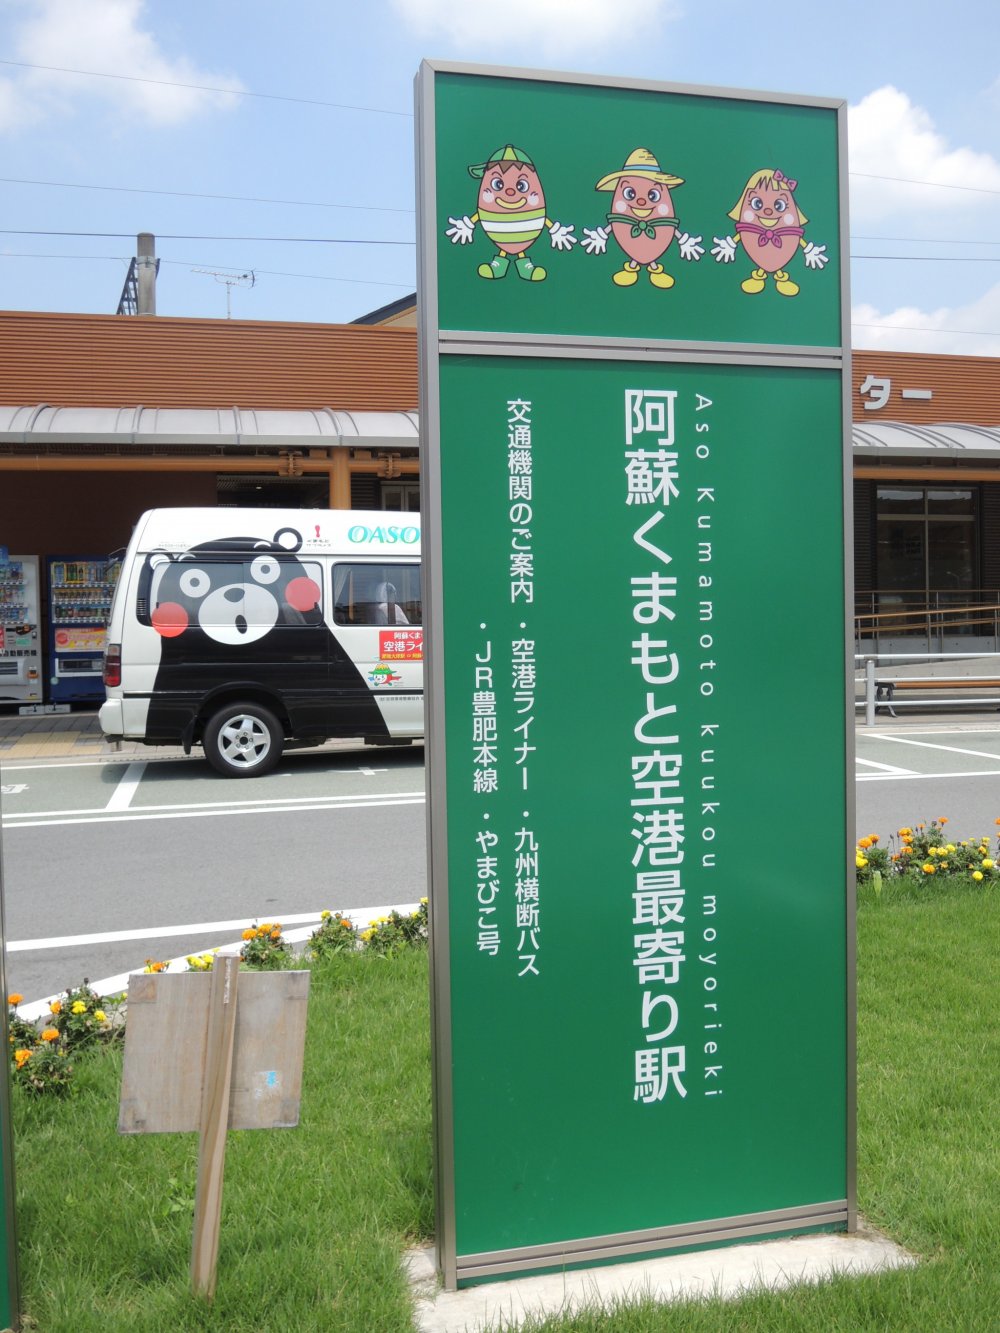 Sign mentioning this being the nearest station to the airport